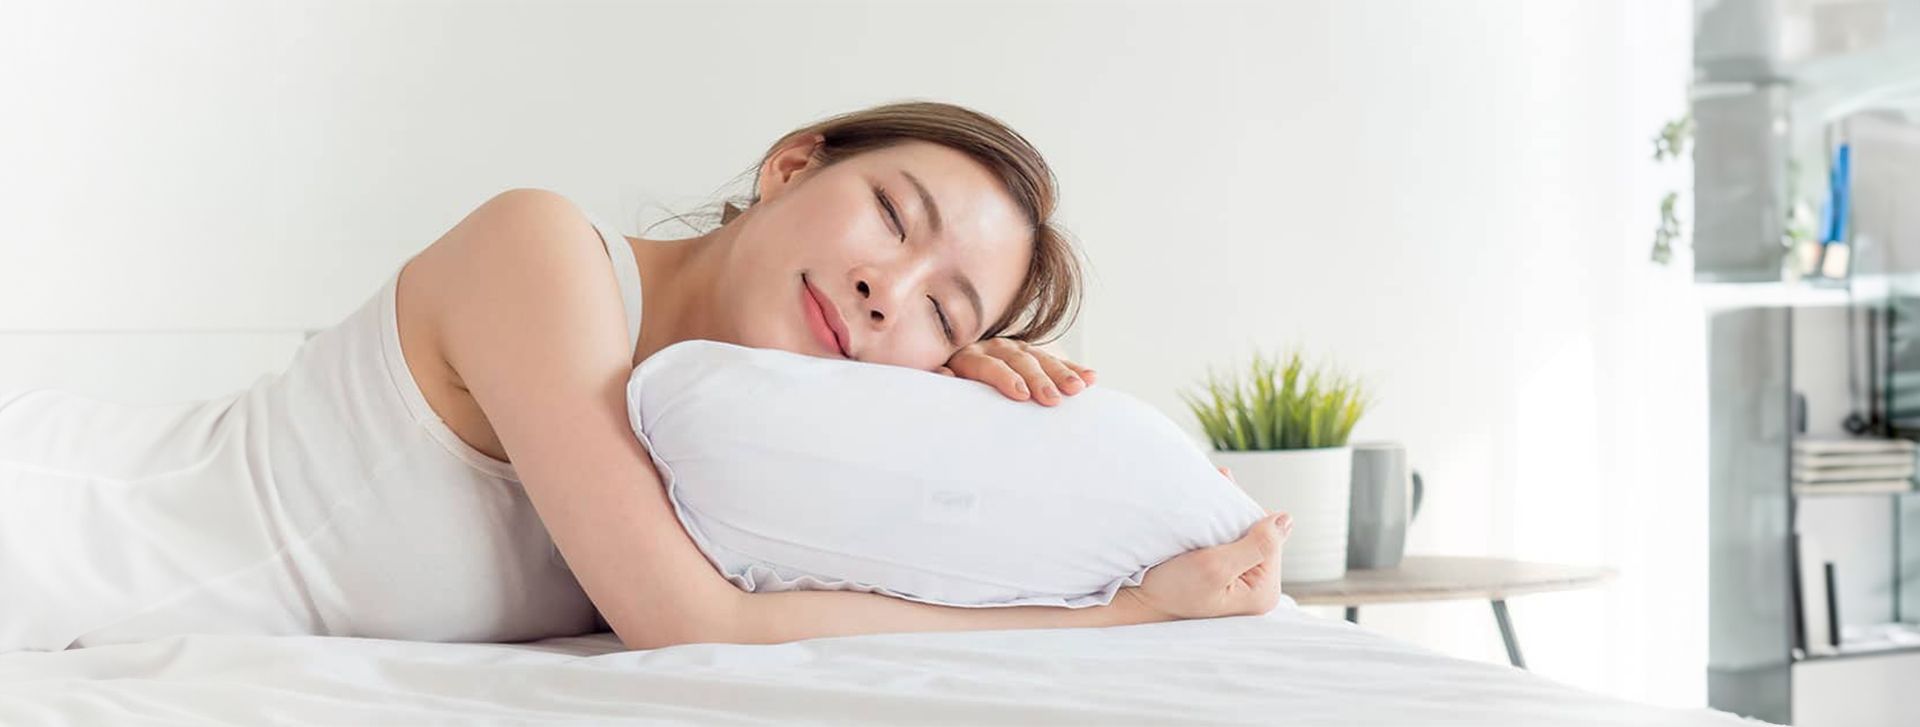 Why Getting Enough Sleep is Important for Weight Loss